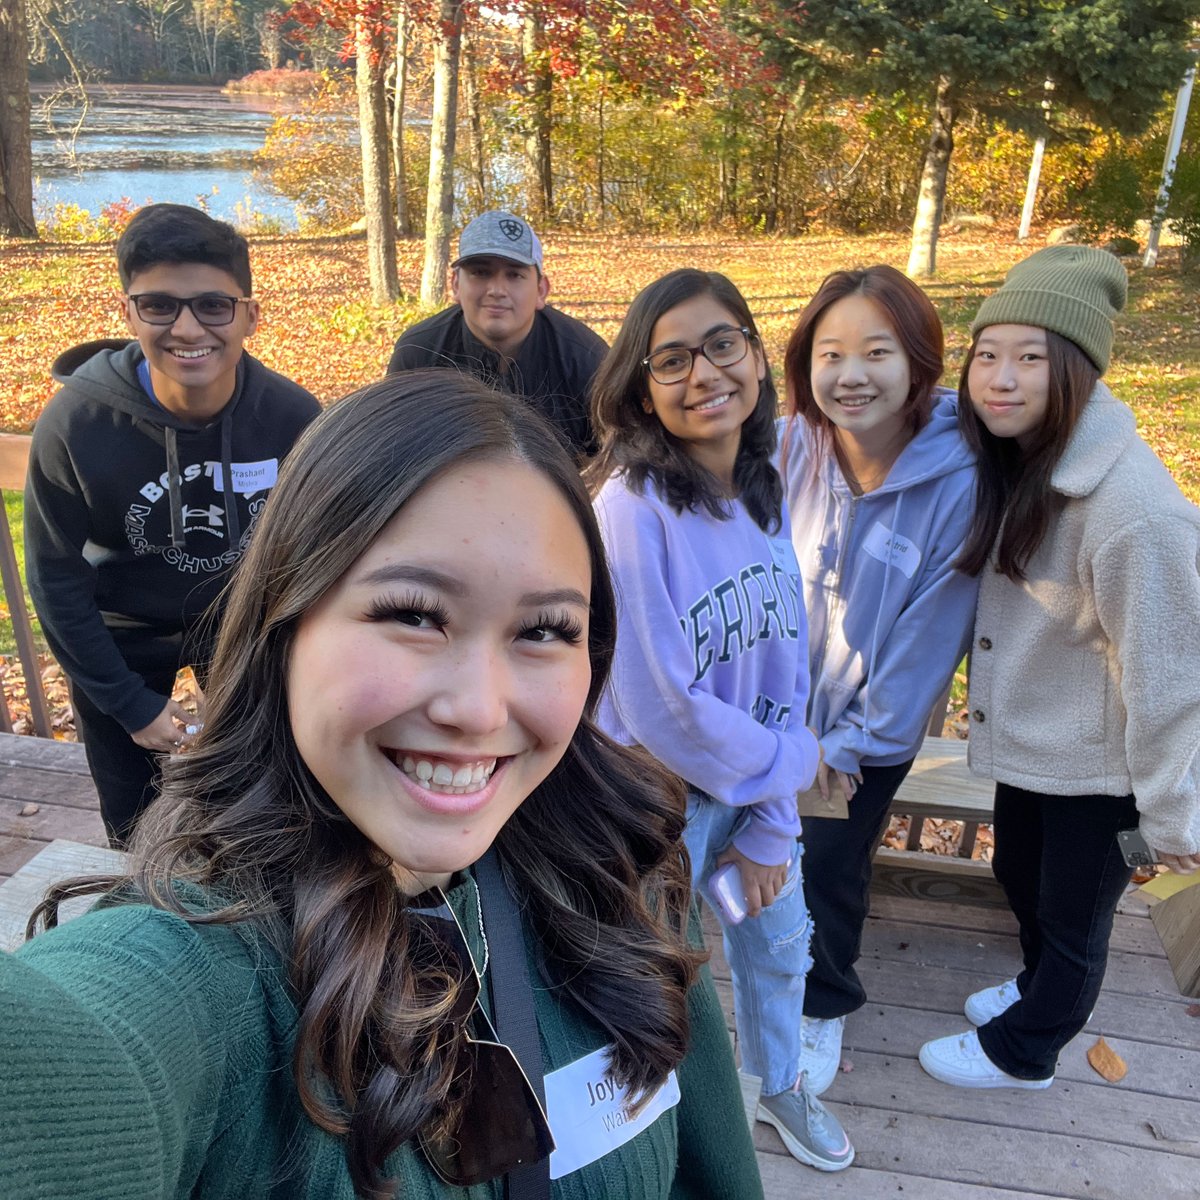 S’mores. Leadership discussions. And special notes to everyone who took part. At our First-Year Senior Retreat, new Babson College students engaged with classmates and received mentorship and guidance from senior students and Babson staff. 💚 #OneBabson